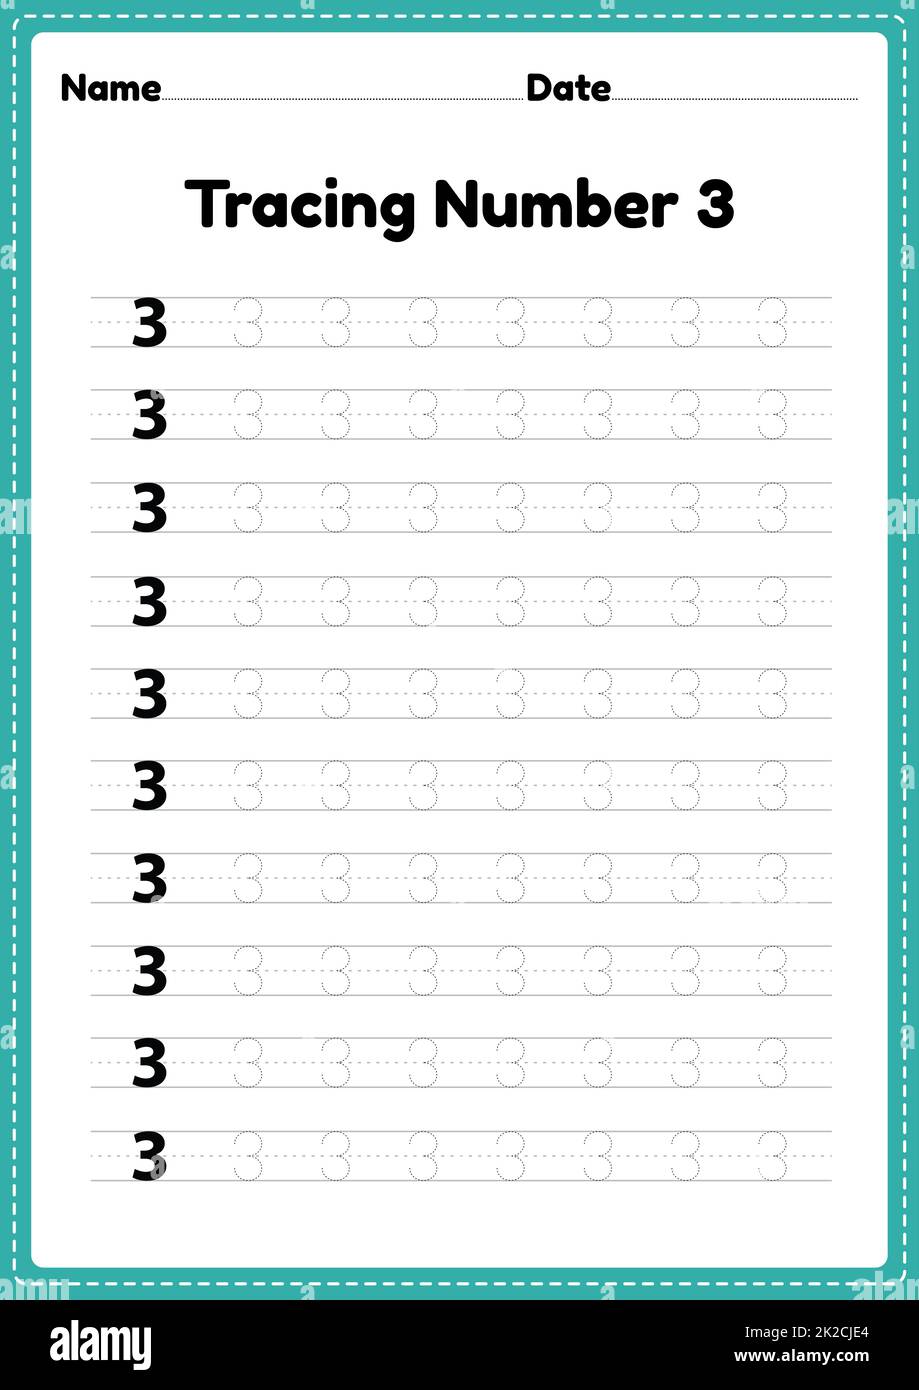 Tracing number 3 worksheet for kindergarten and preschool kids for educational handwriting practice in a printable page. Stock Photo